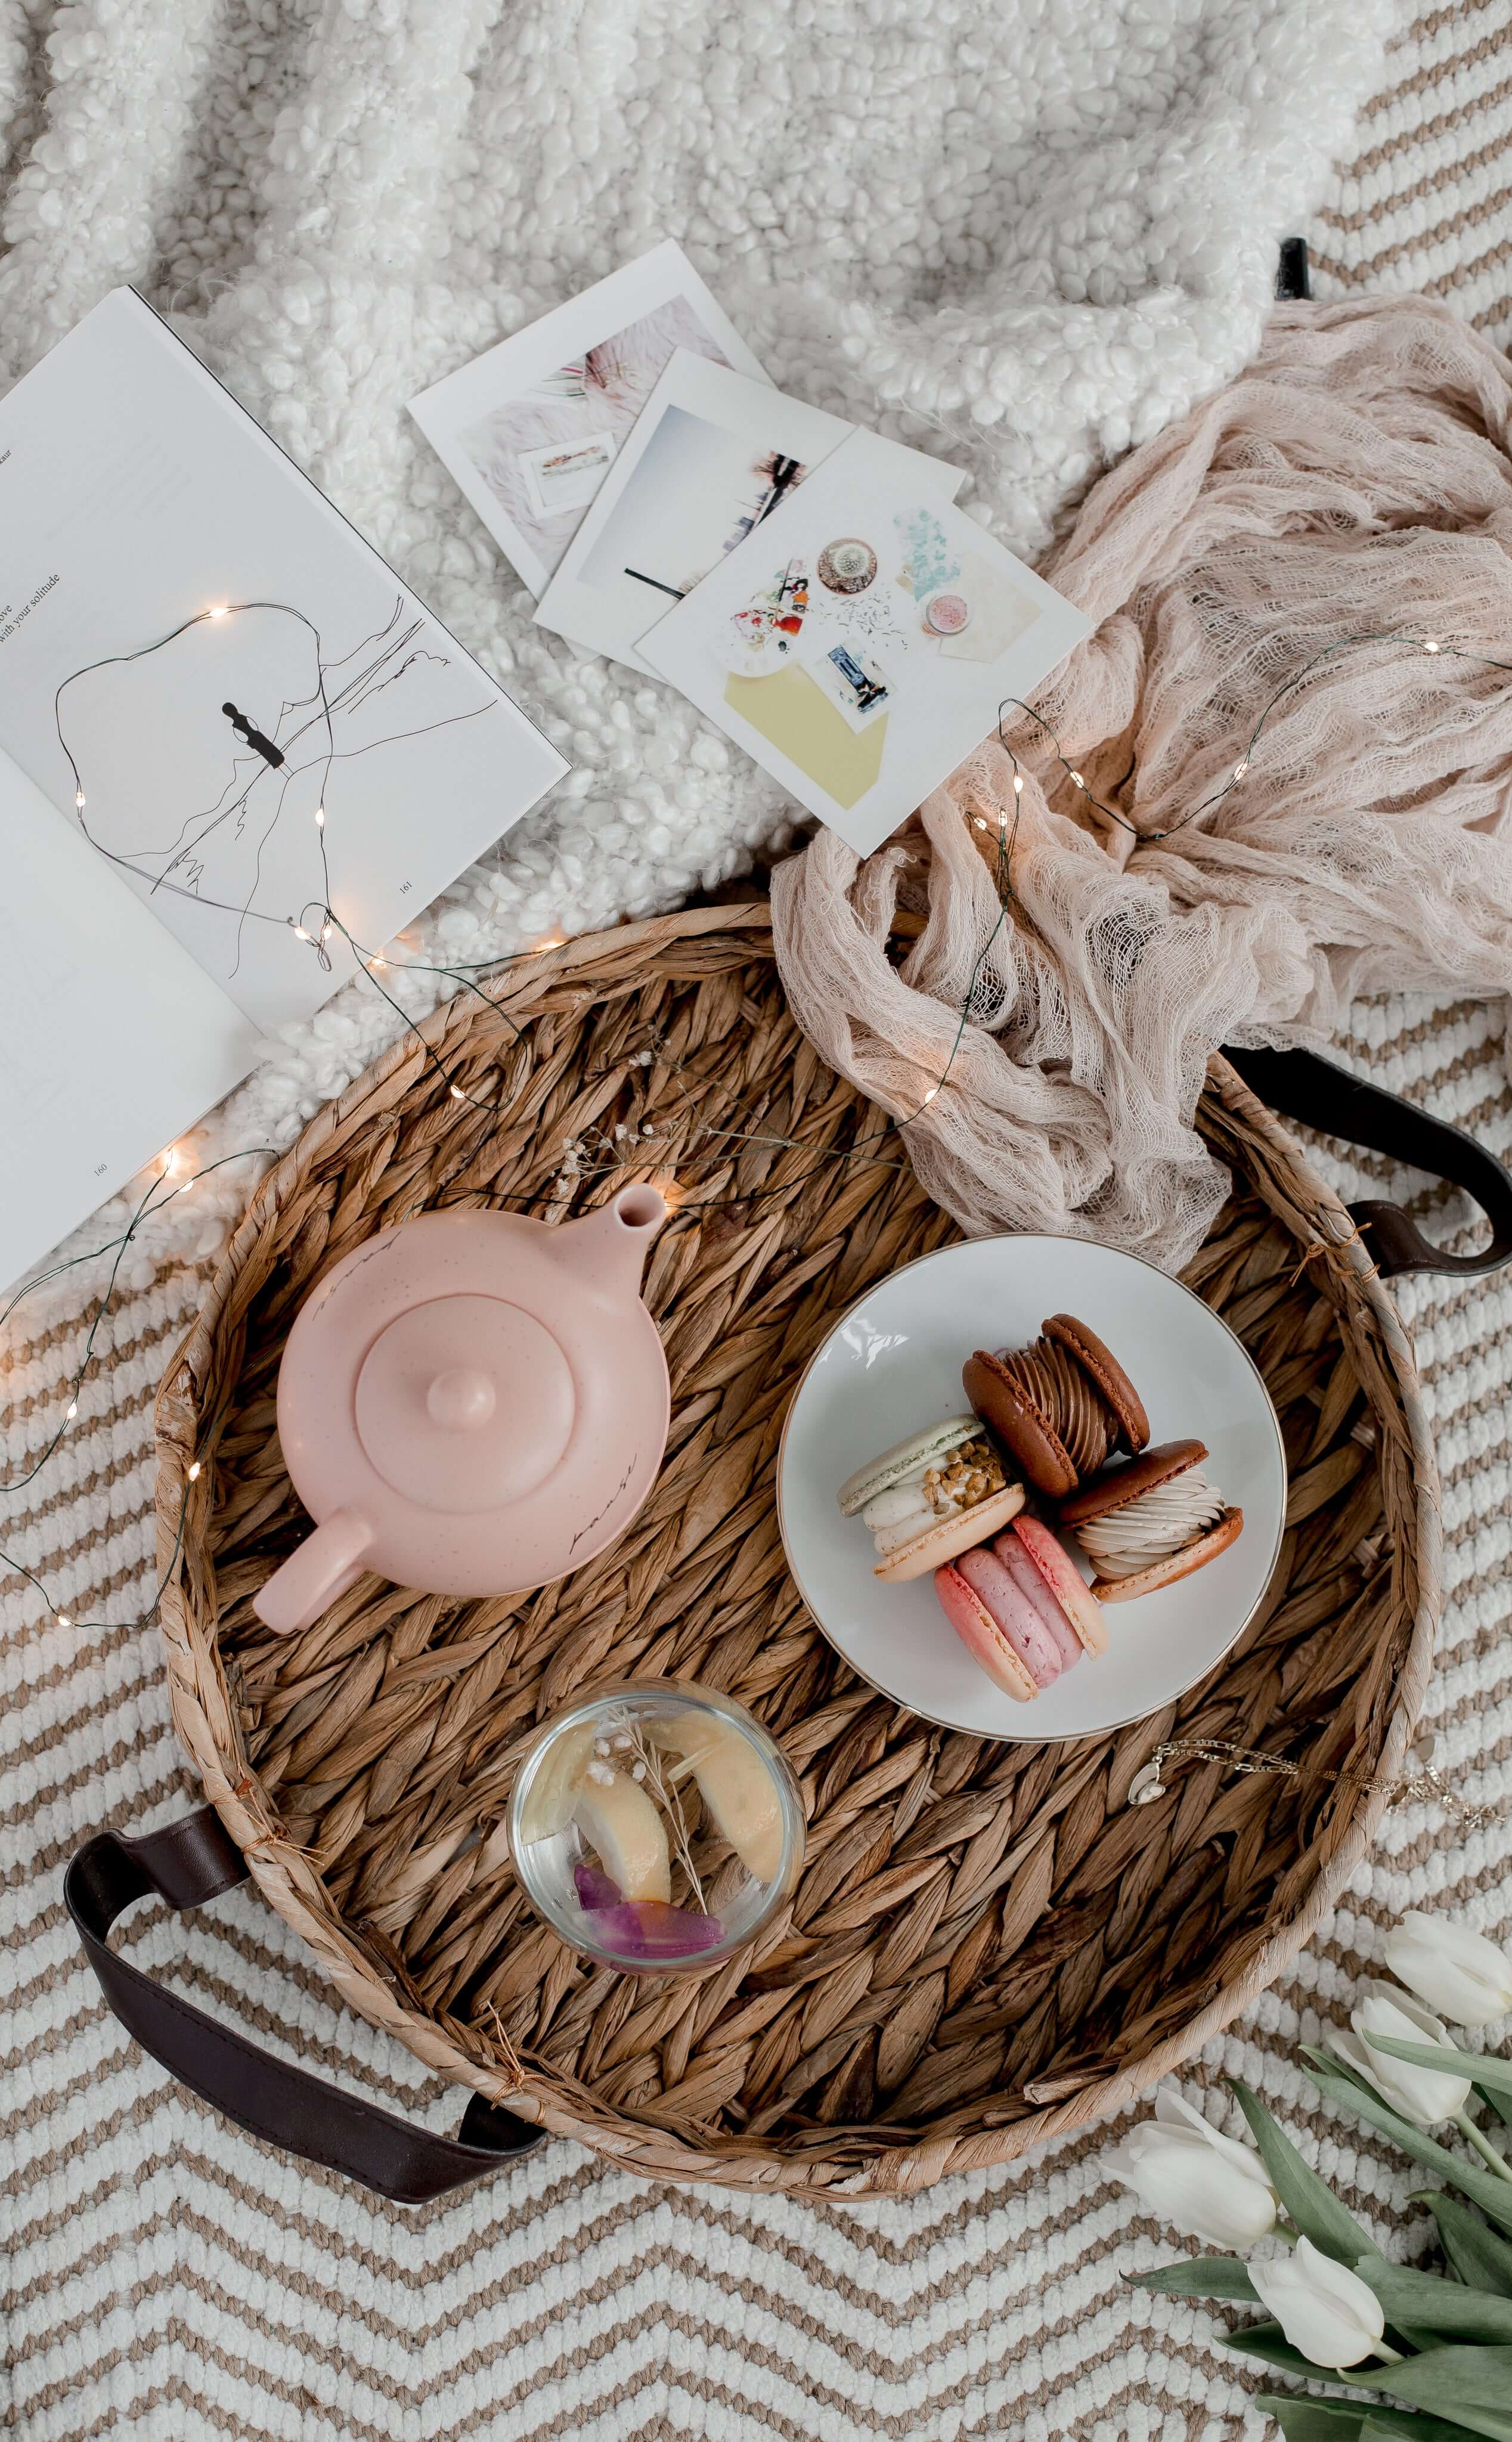 A whicker tray holding a pink teapot, a cup of floral tea and a plate of macarons on a textile background with a soft, organic scarf and flowers.